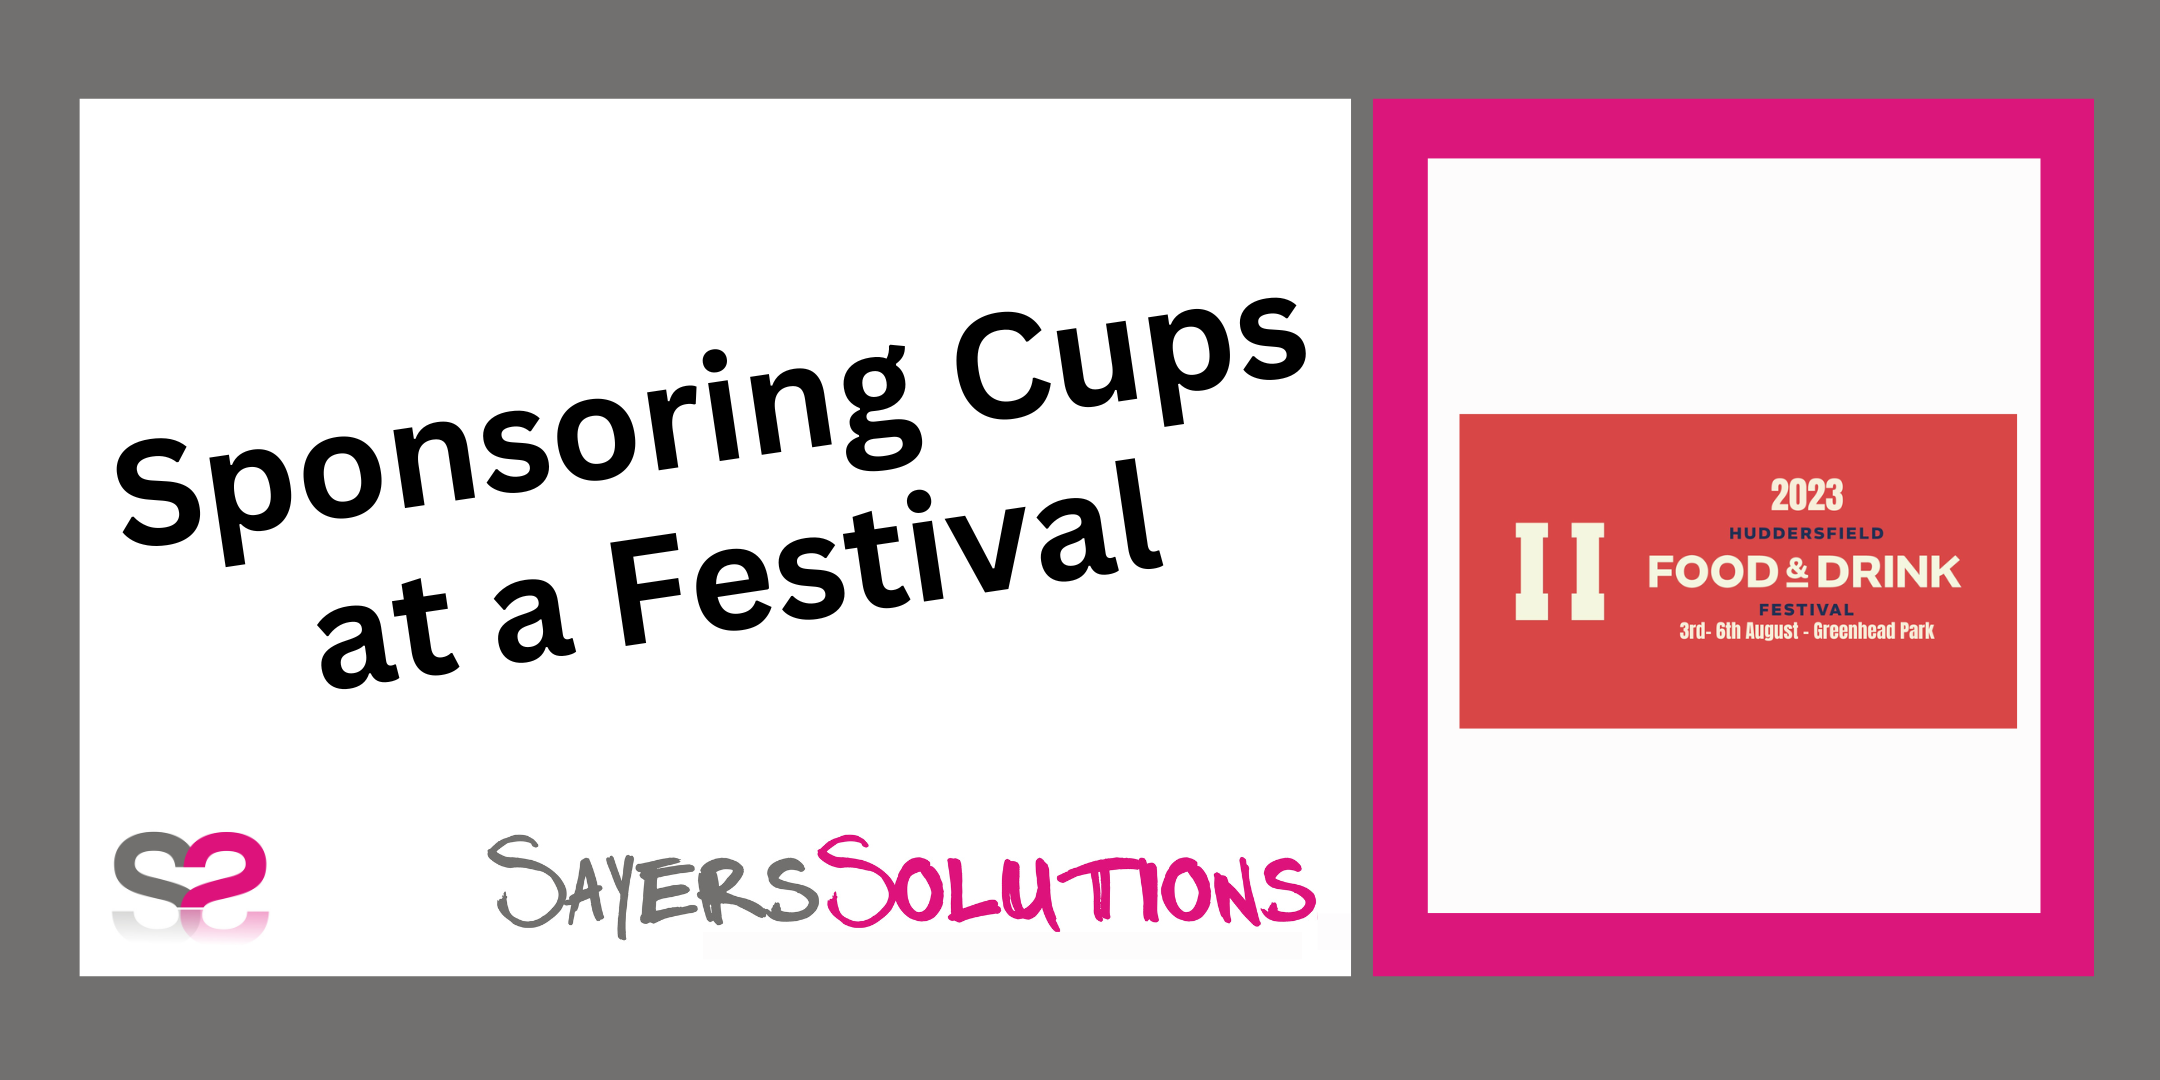 Sponsoring Cups at a Festival